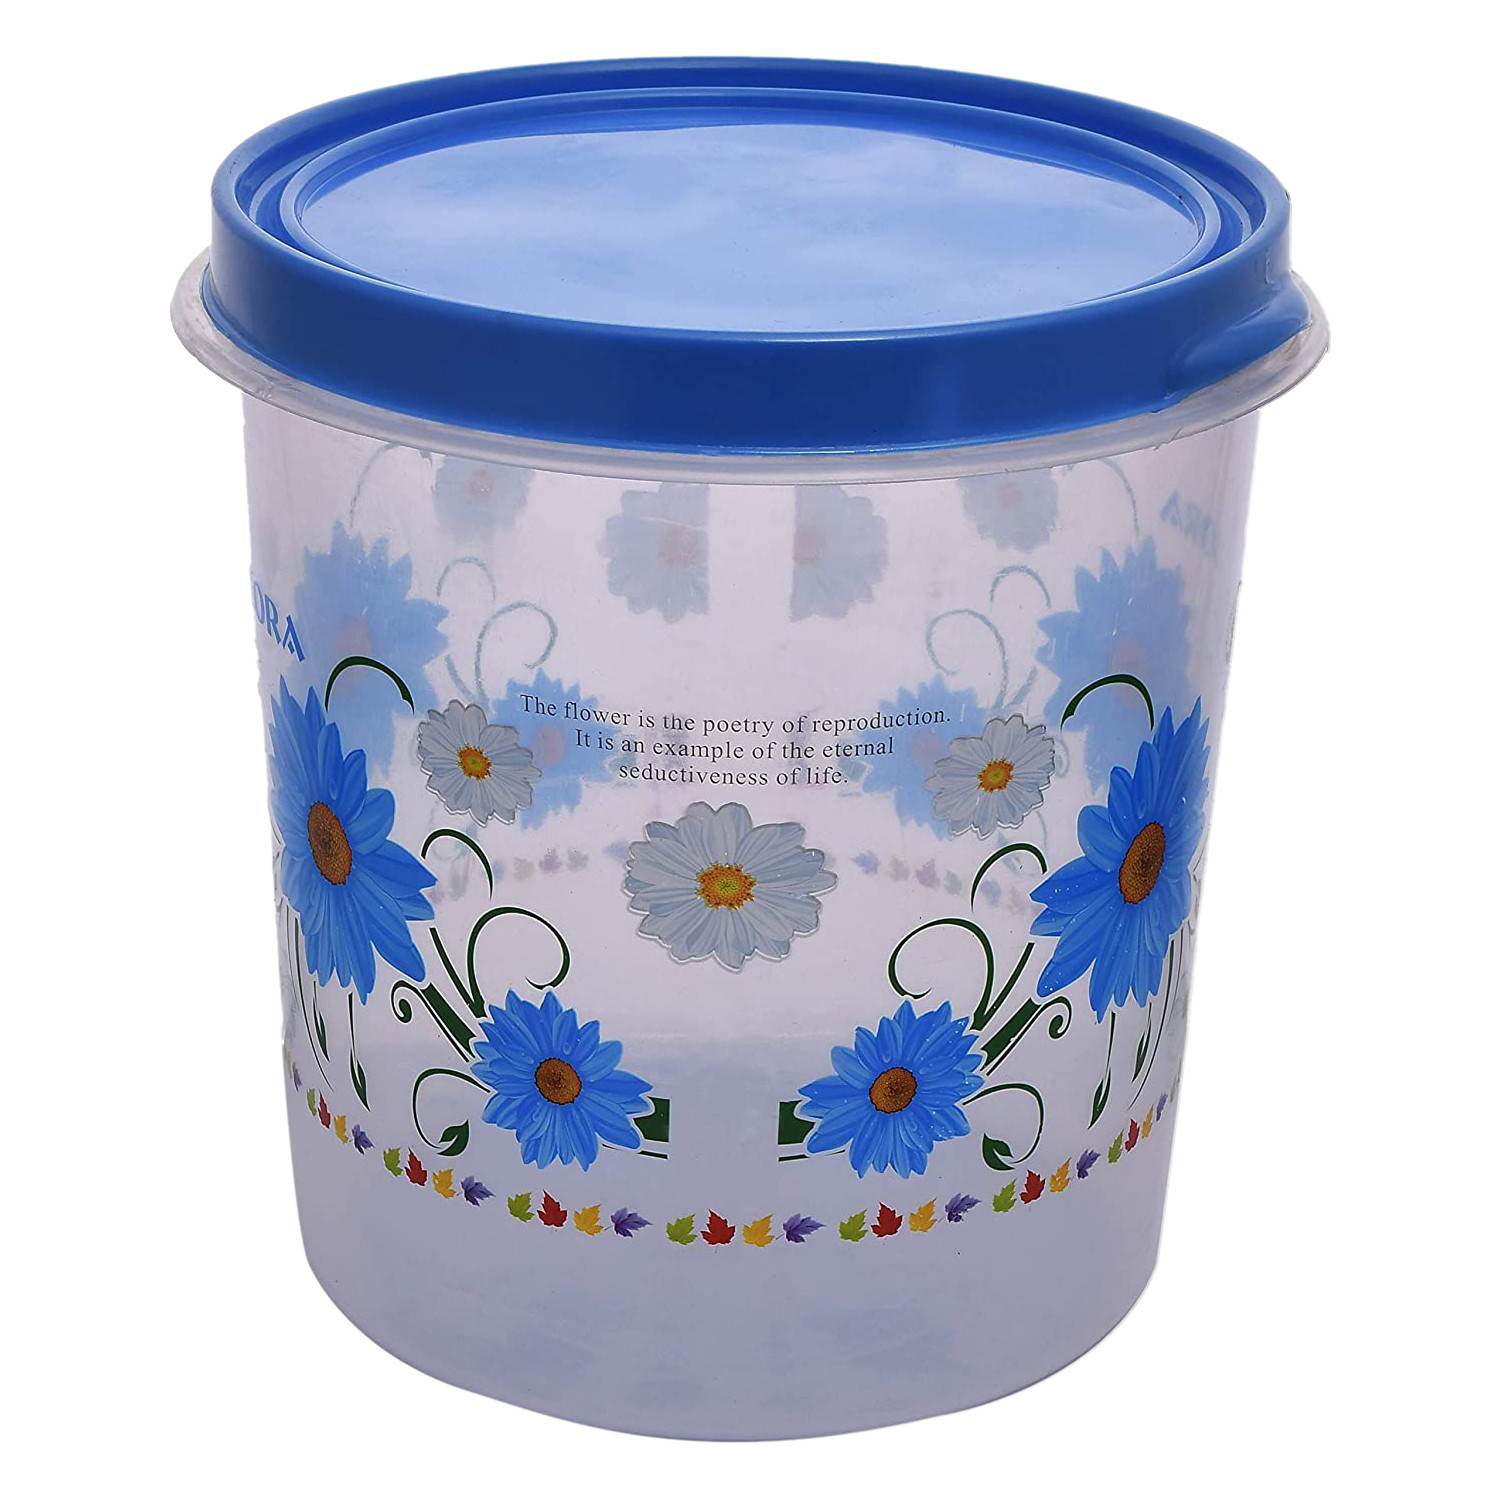 Kuber Industries Storage Container|Durable Plastic Floral Design BPA Free Food Kitchen Organizer With Lid|Food Utility Jar, 10 Ltr (Blue)